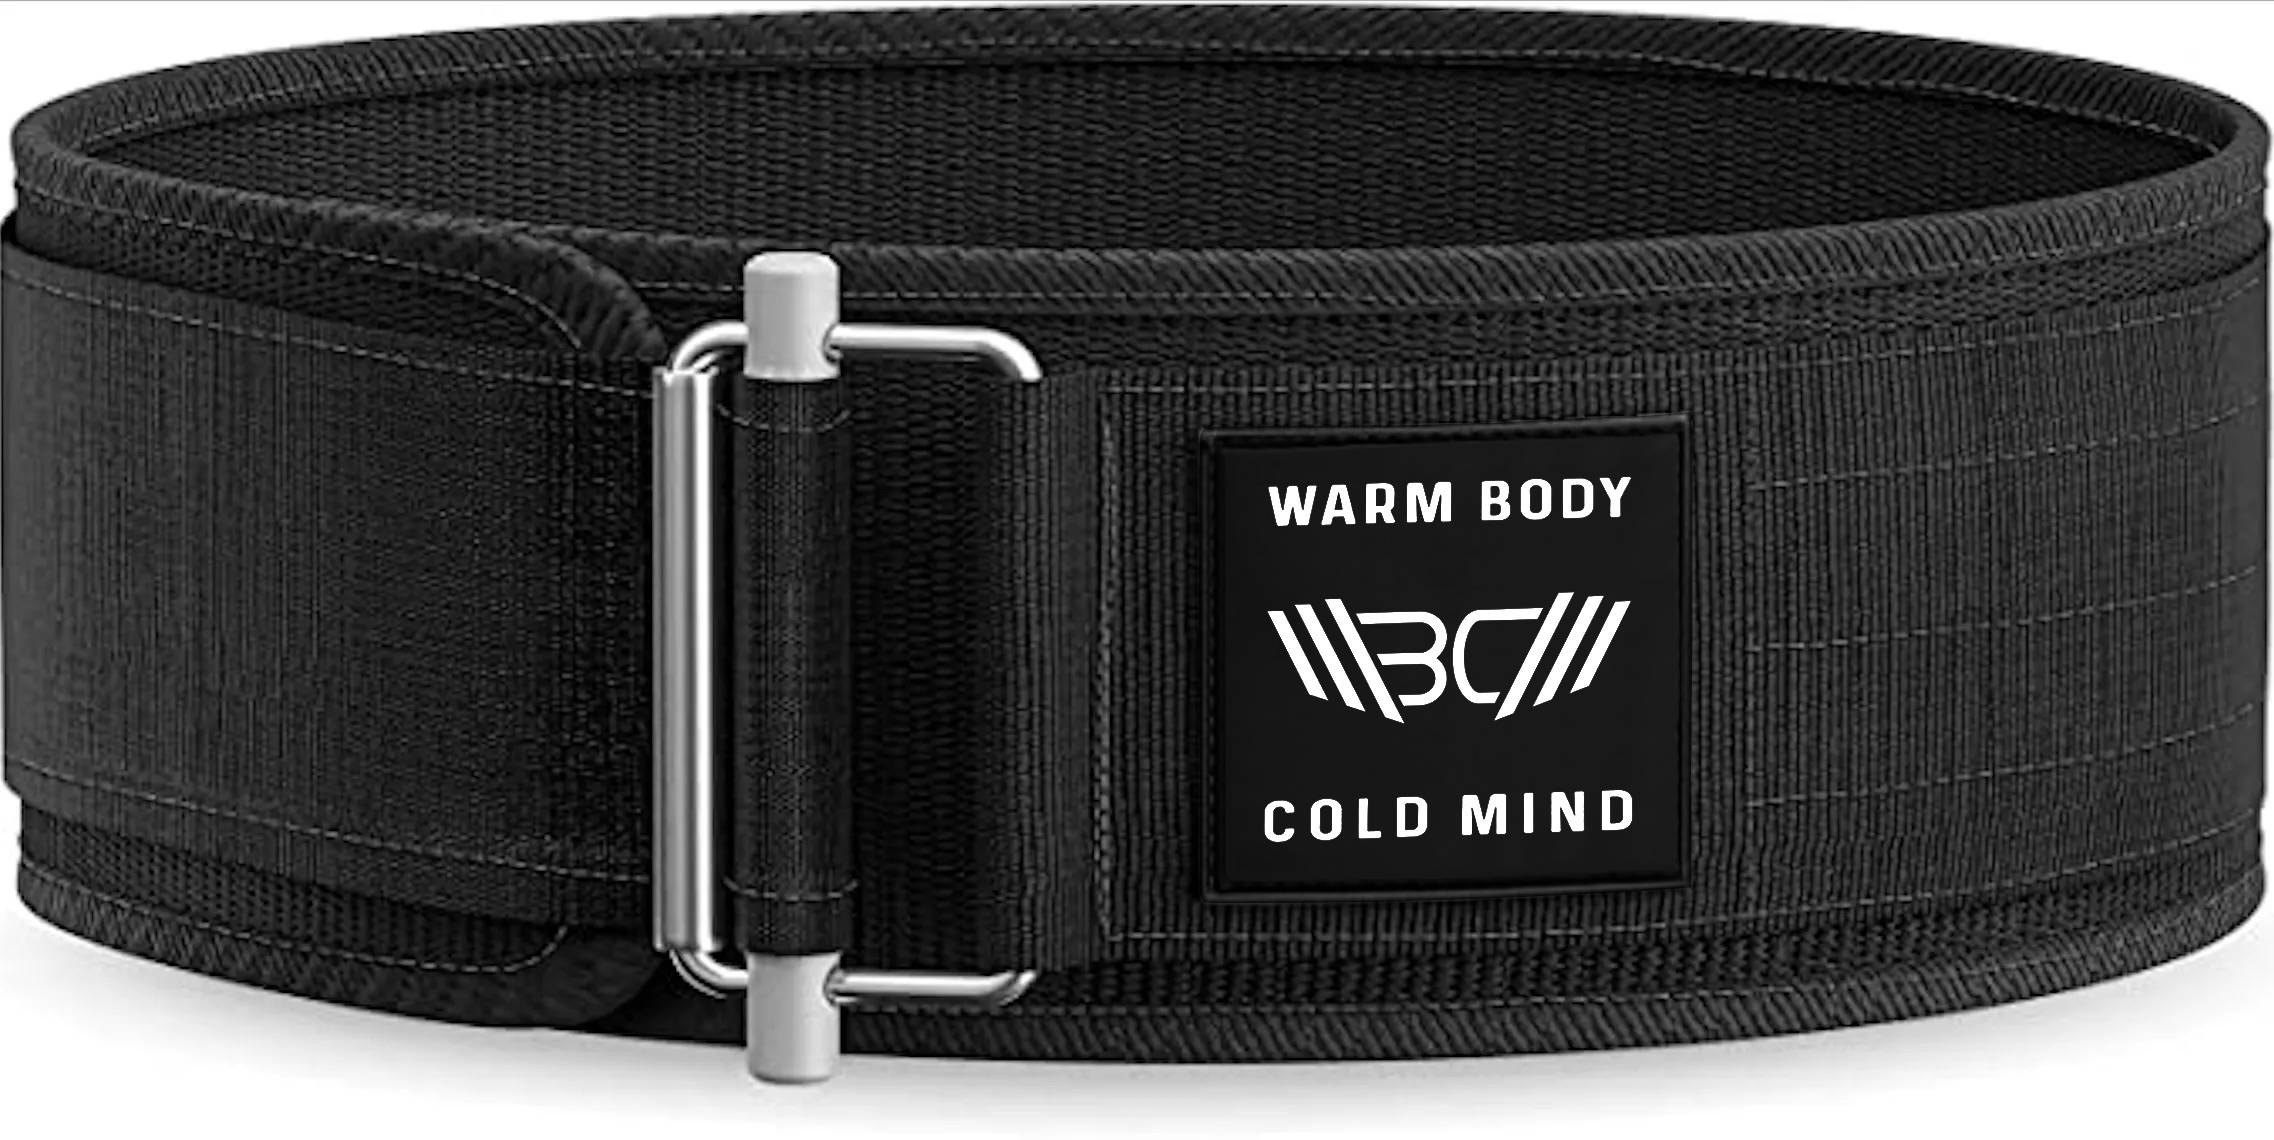 WARM BODY COLD MIND Self-Locking Weight Lifting Belt - Best for Fitness.